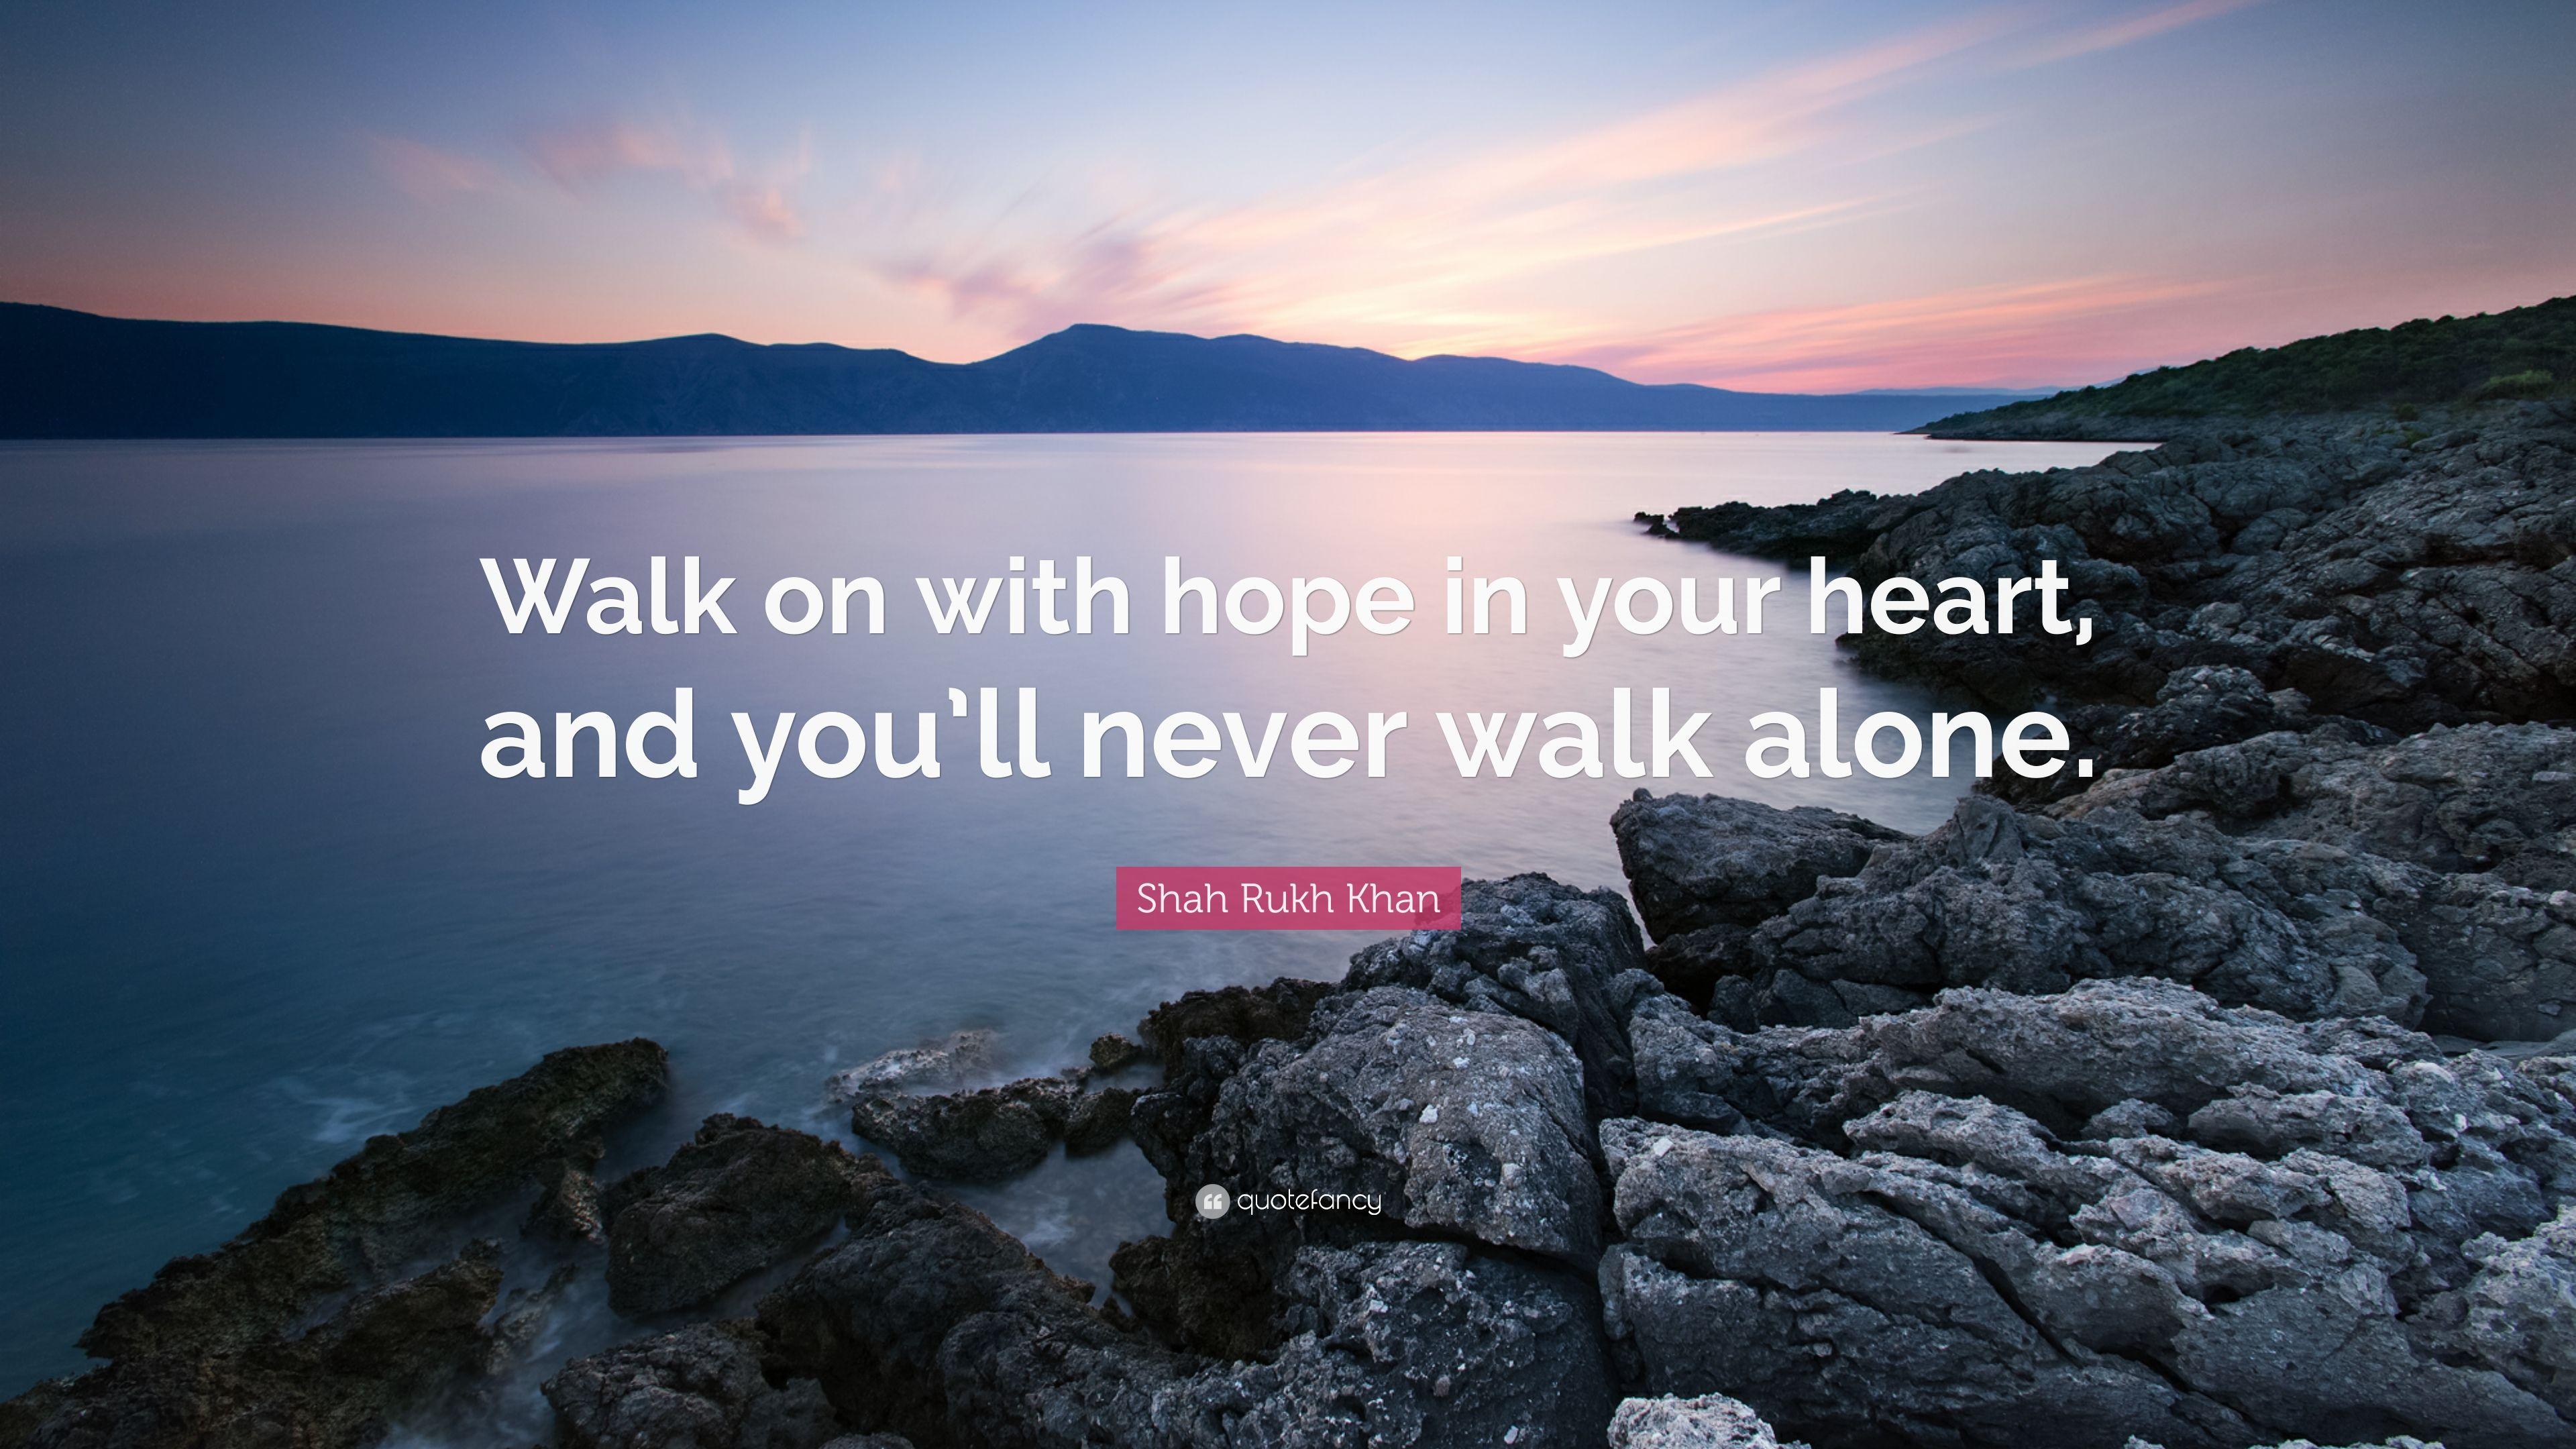 Shah Rukh Khan Quote: “Walk on with hope in your heart, and you'll